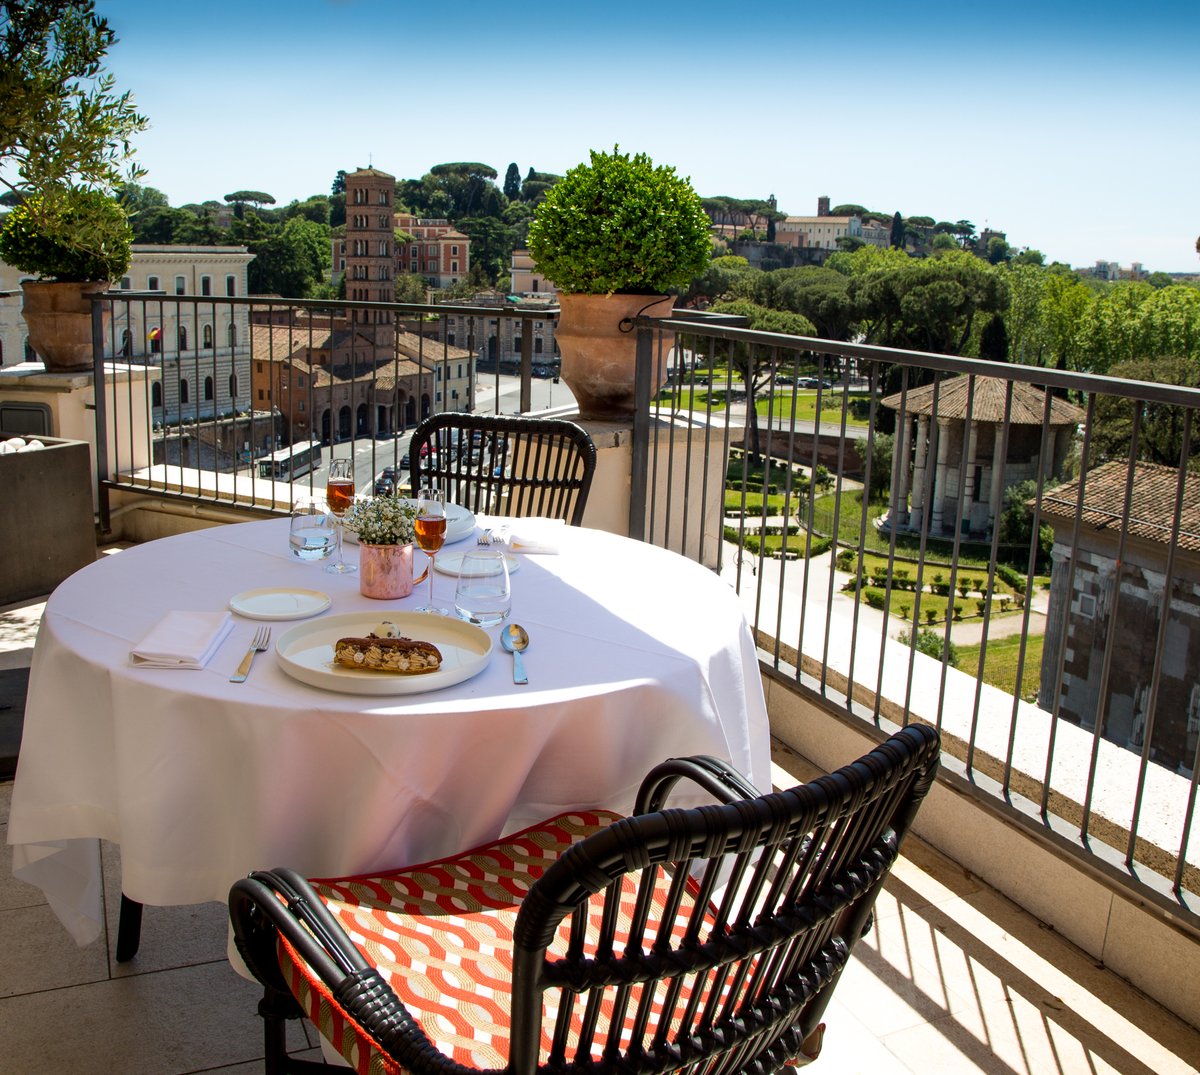 May and lunch on the rooftop. 🧡

#47boutiquehotel #rome